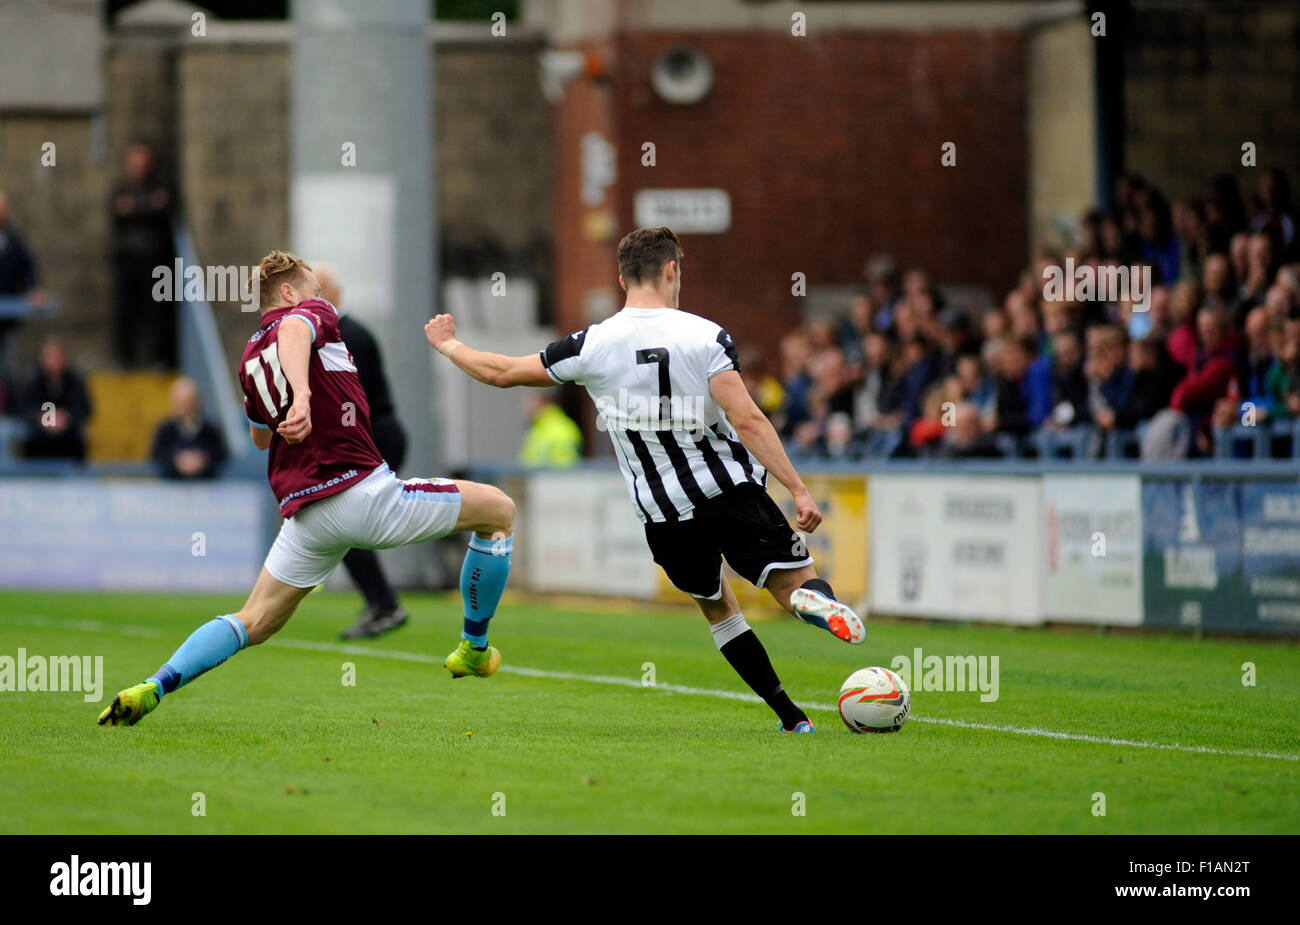 Dorchester, England. 31st August 2015. Mark Molesley (left WFC) makes a challenge on Oakley Hanger (right) of Dorchester during the Southern Premier League derby game between Dorchester Town FC v  Weymouth FC at The Greene King Stadium. Dorchester won the game 1-0. Credit:  David Partridge / Alamy Live News Stock Photo